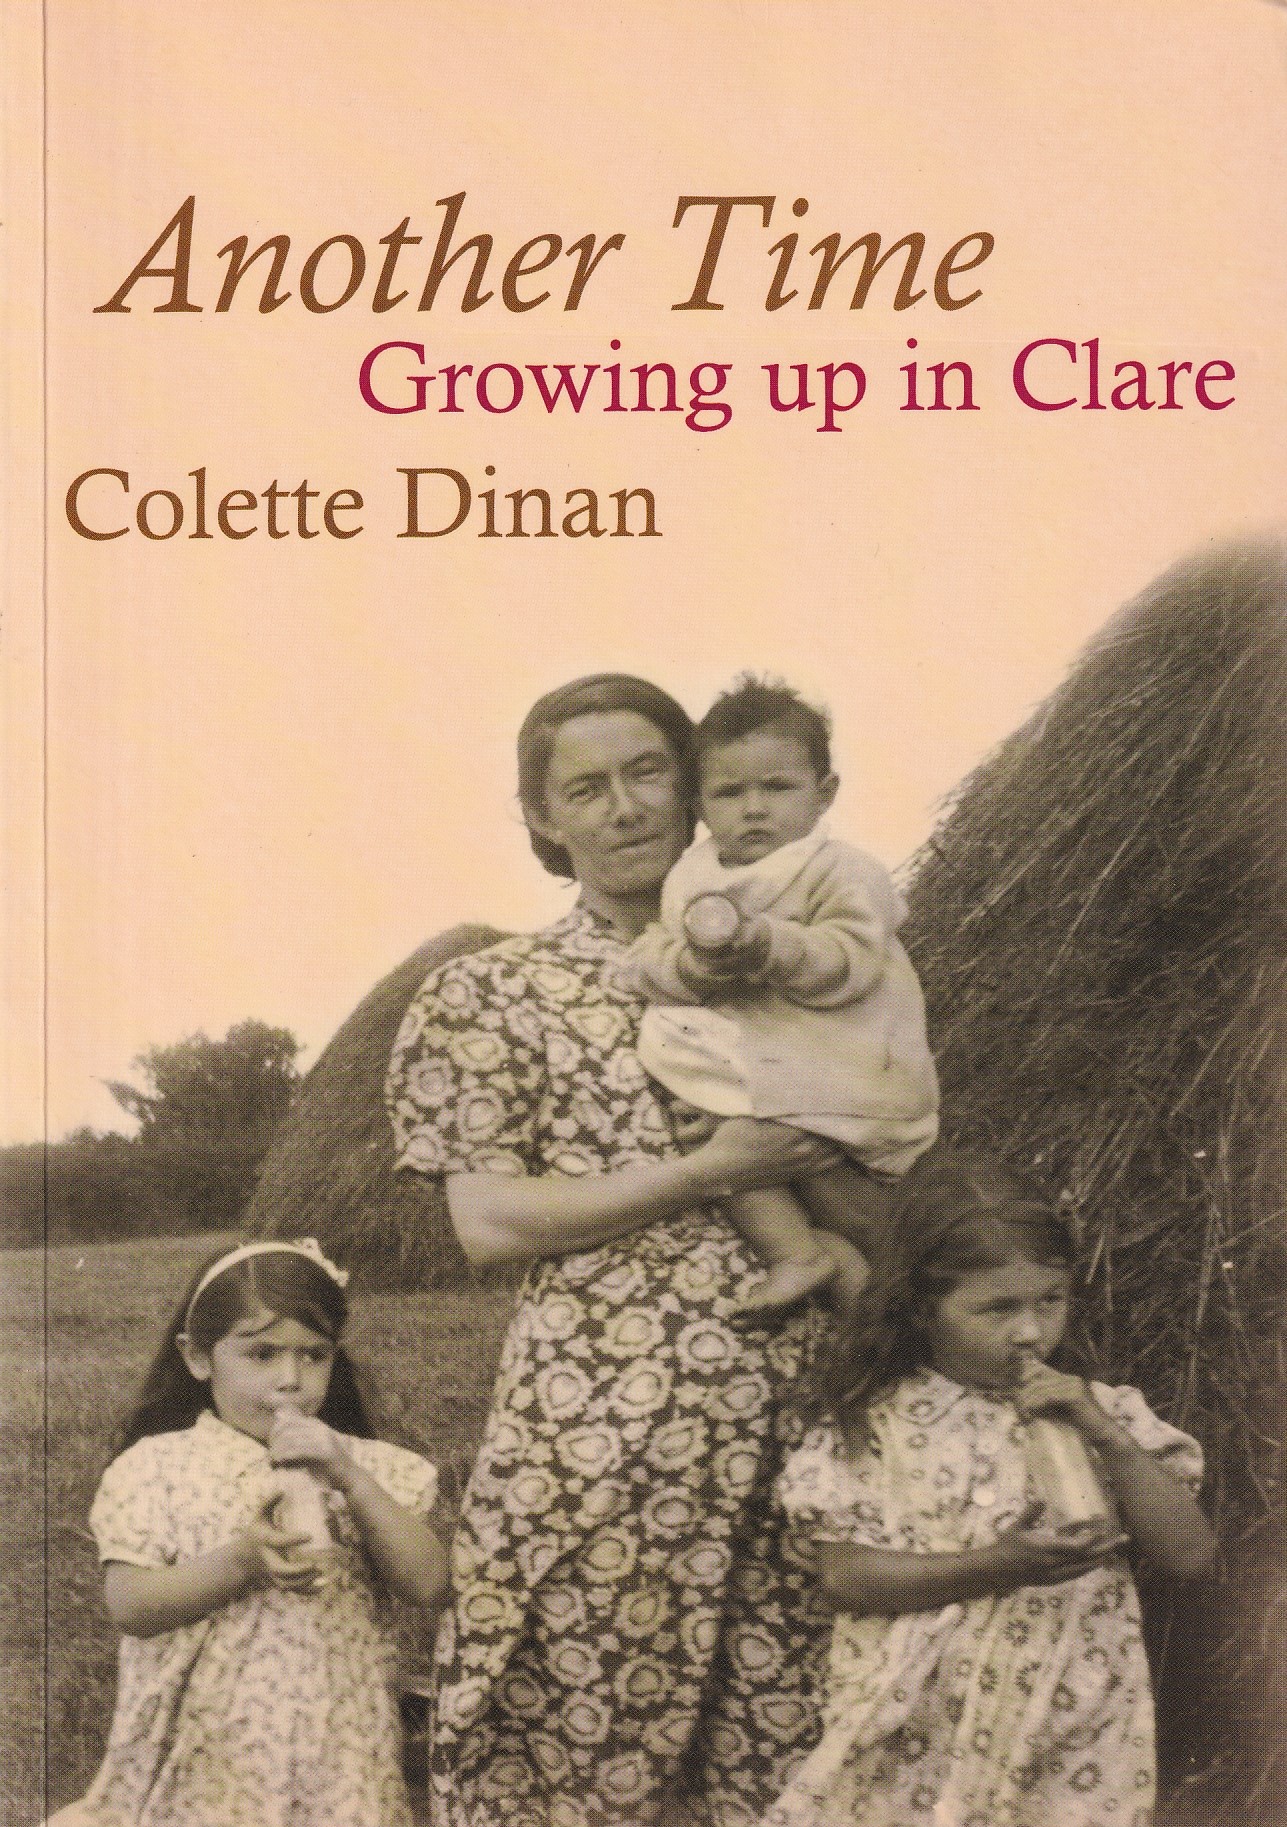 Another Time: Growing up in Clare by Colette Dinan